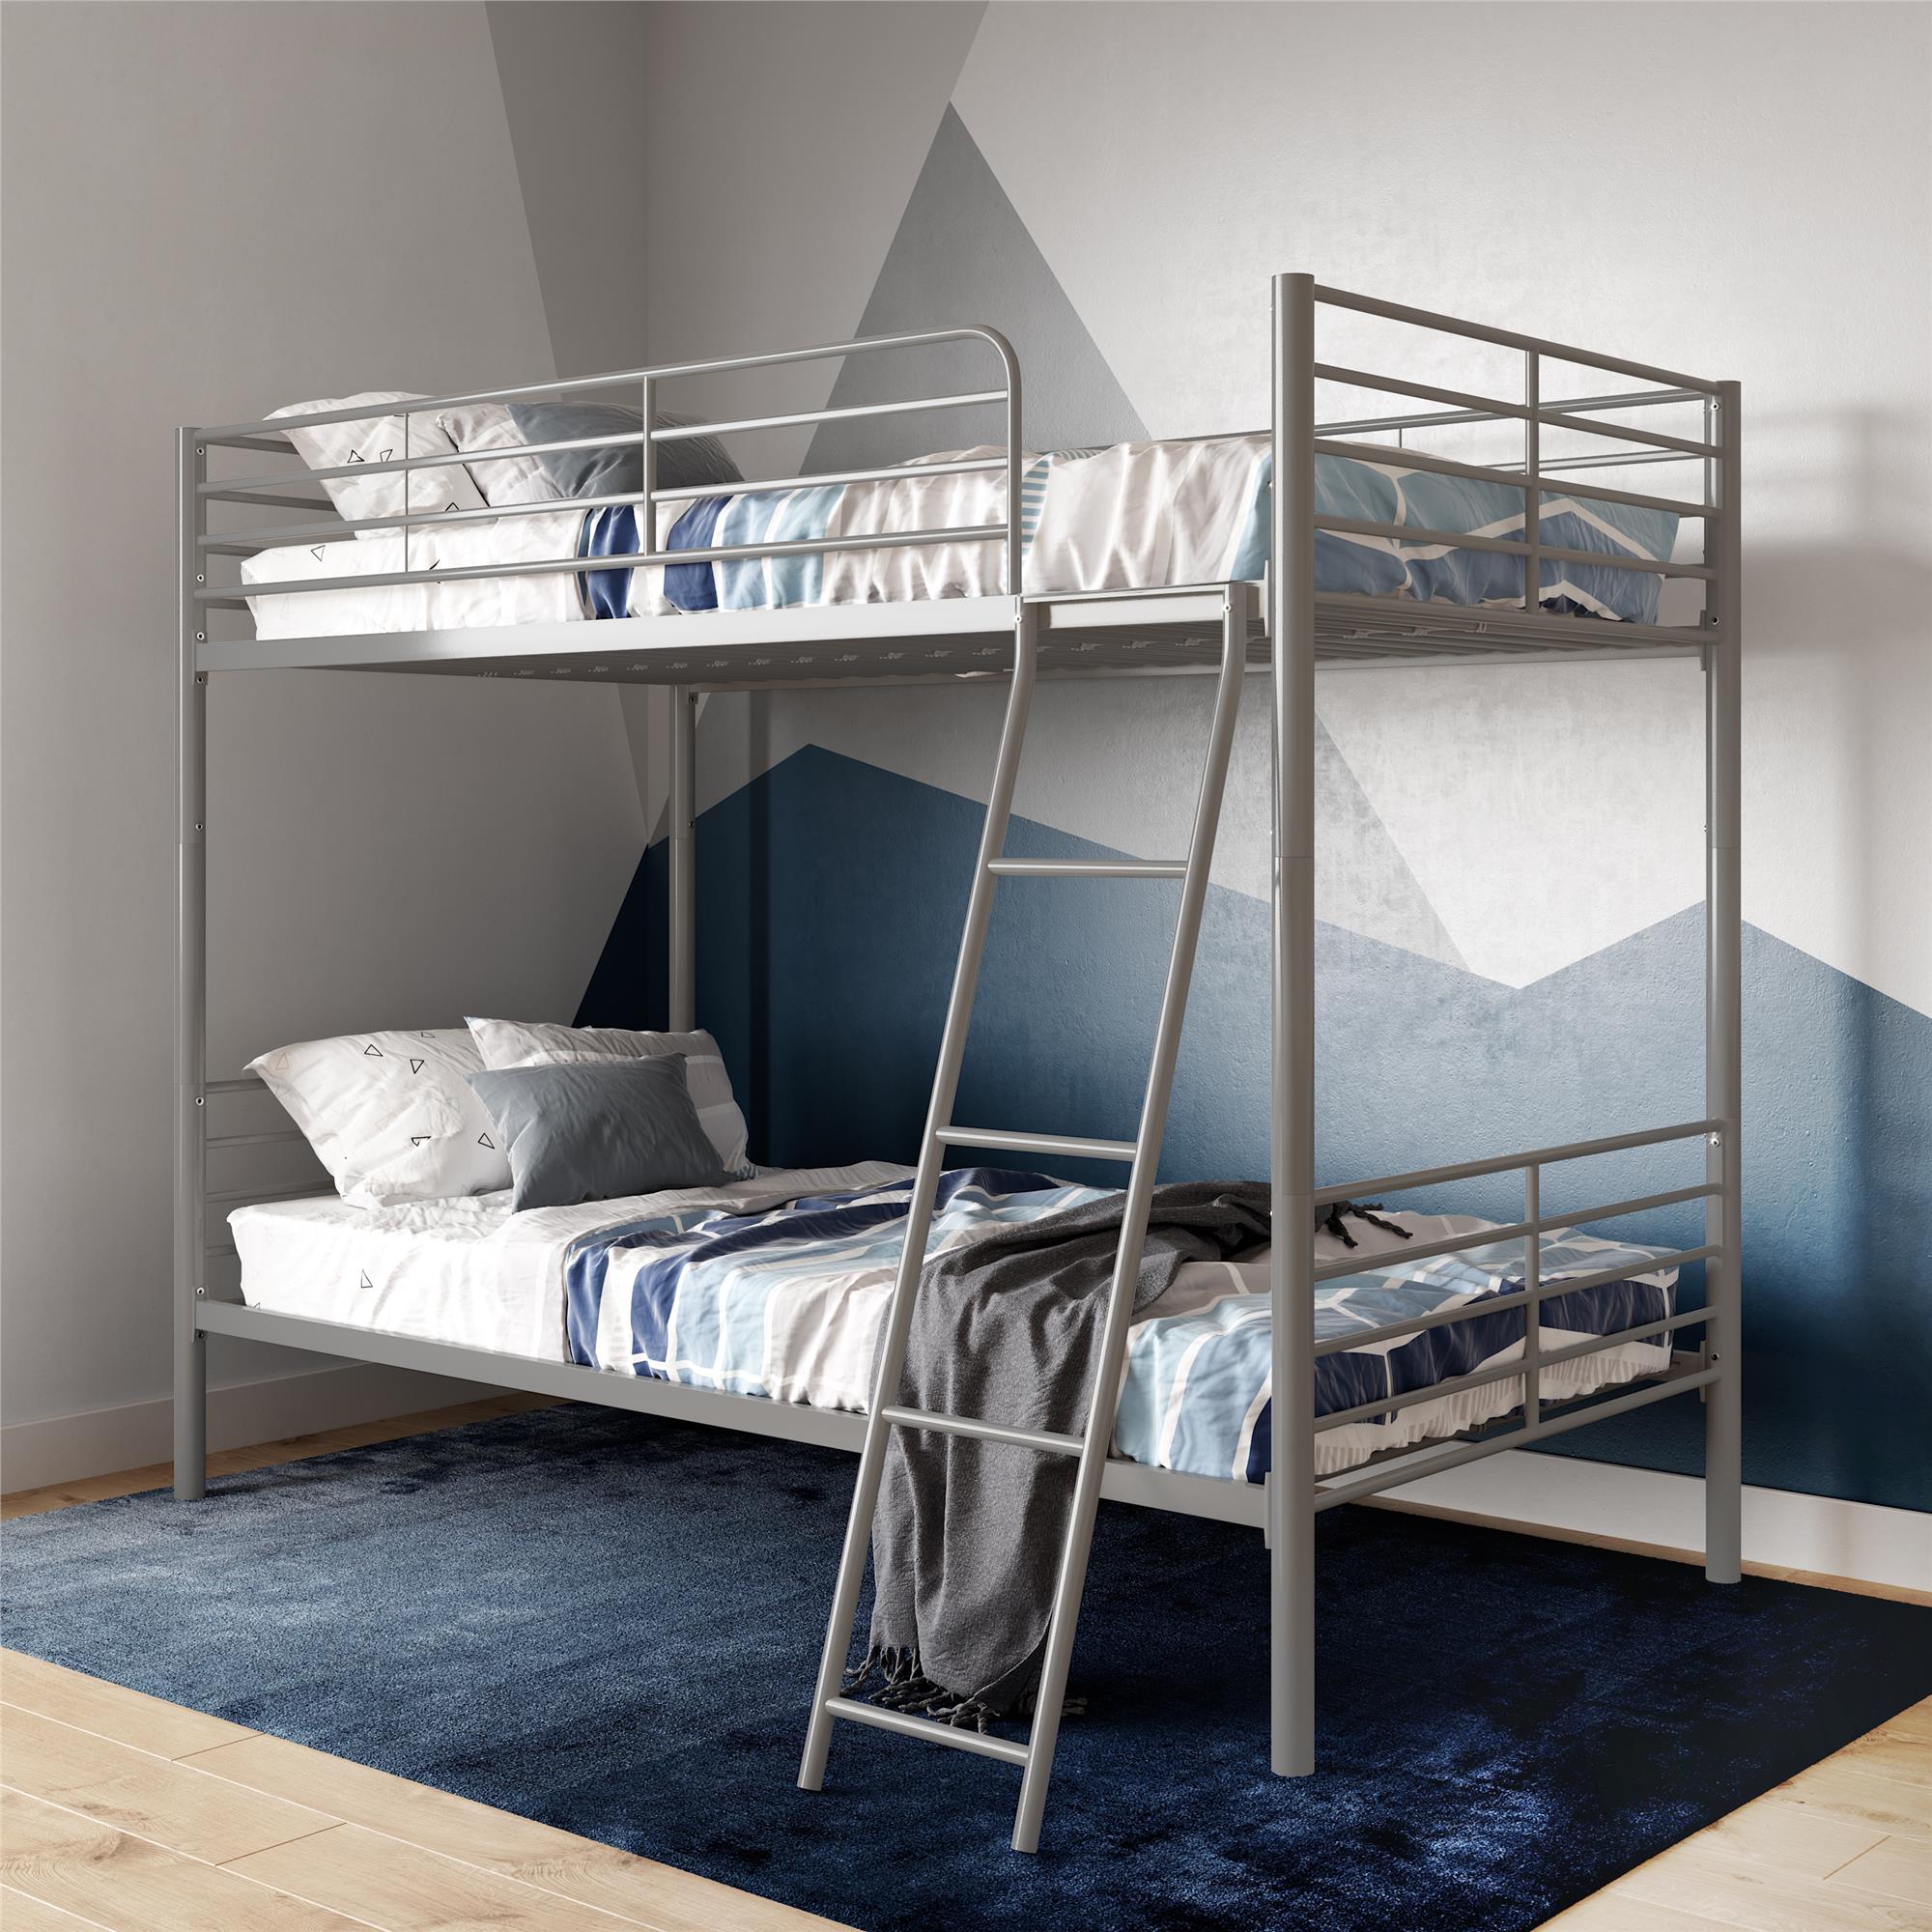 Mainstays Convertible Twin over Twin Metal Bunk Bed, Silver - image 1 of 26